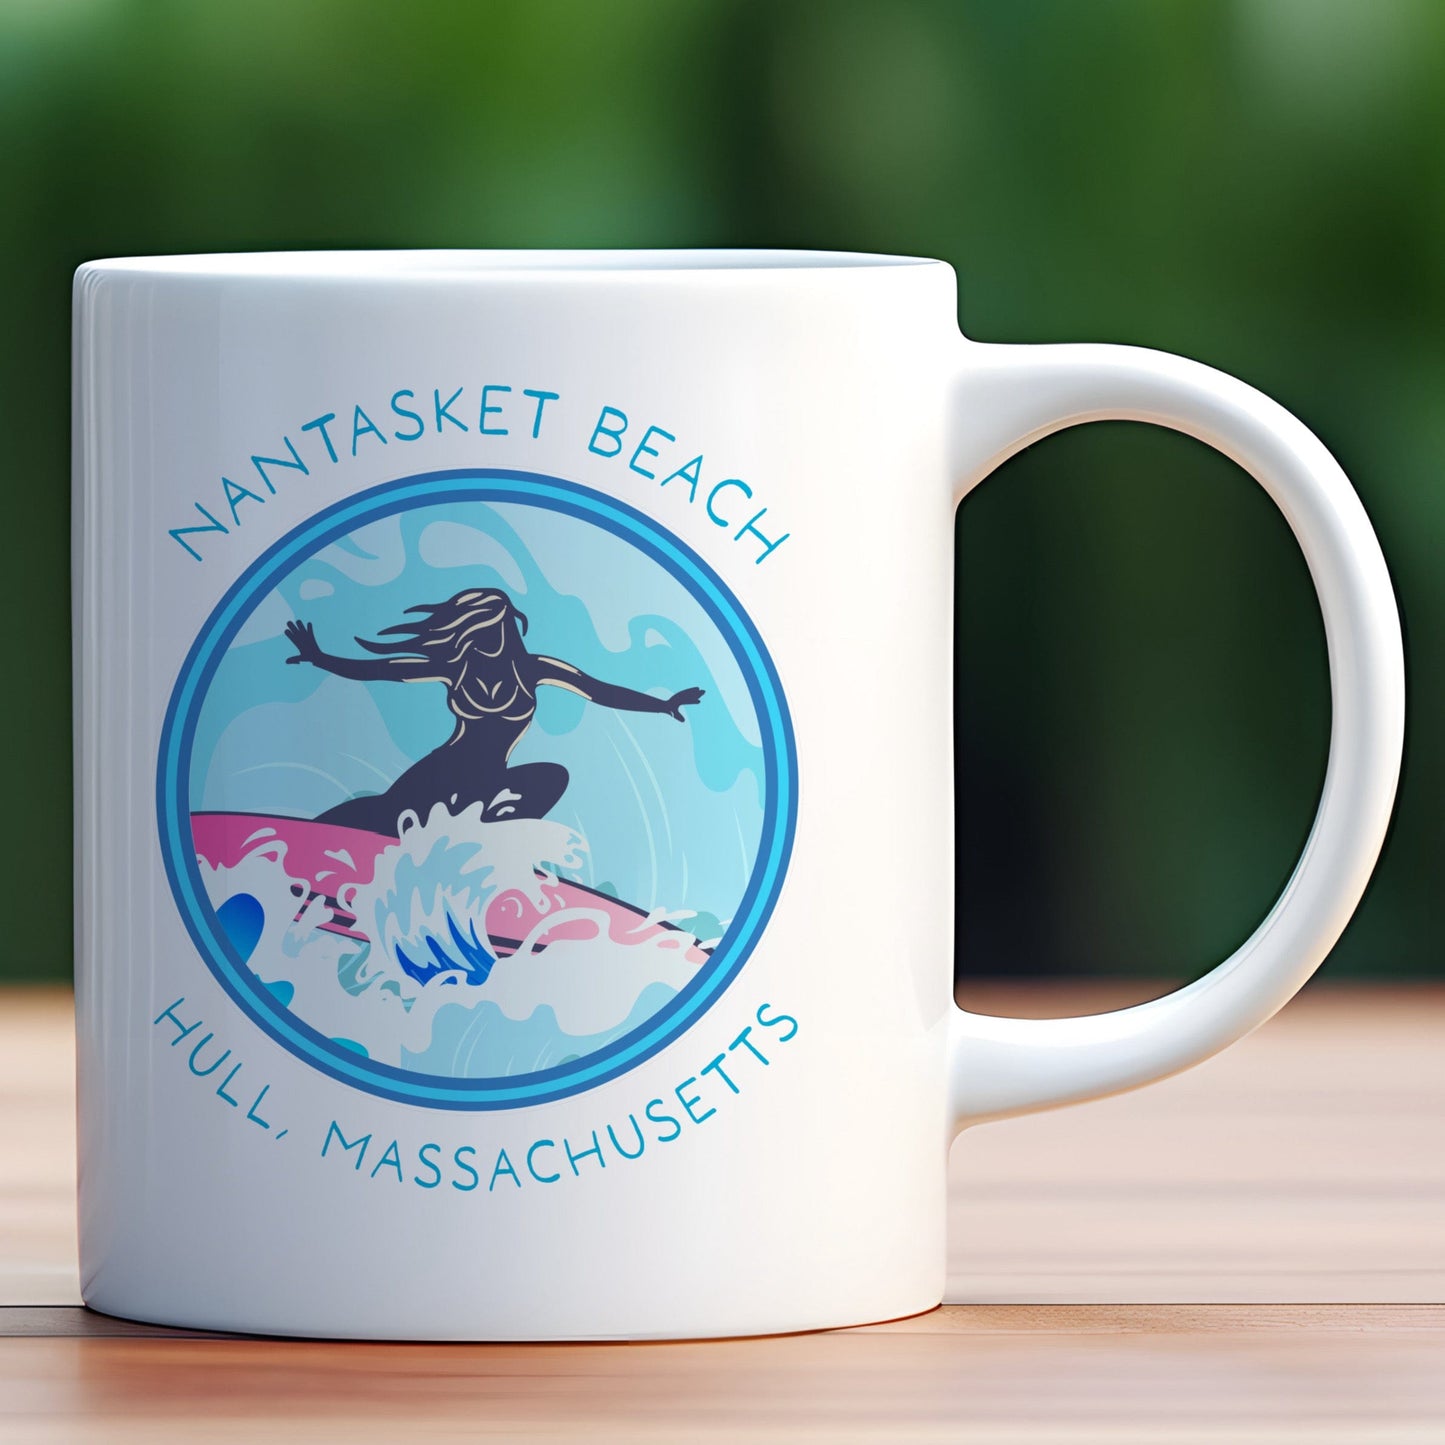 Personalize Free Hull MA Ceramic Mug Collection from Baby Squid Ink 